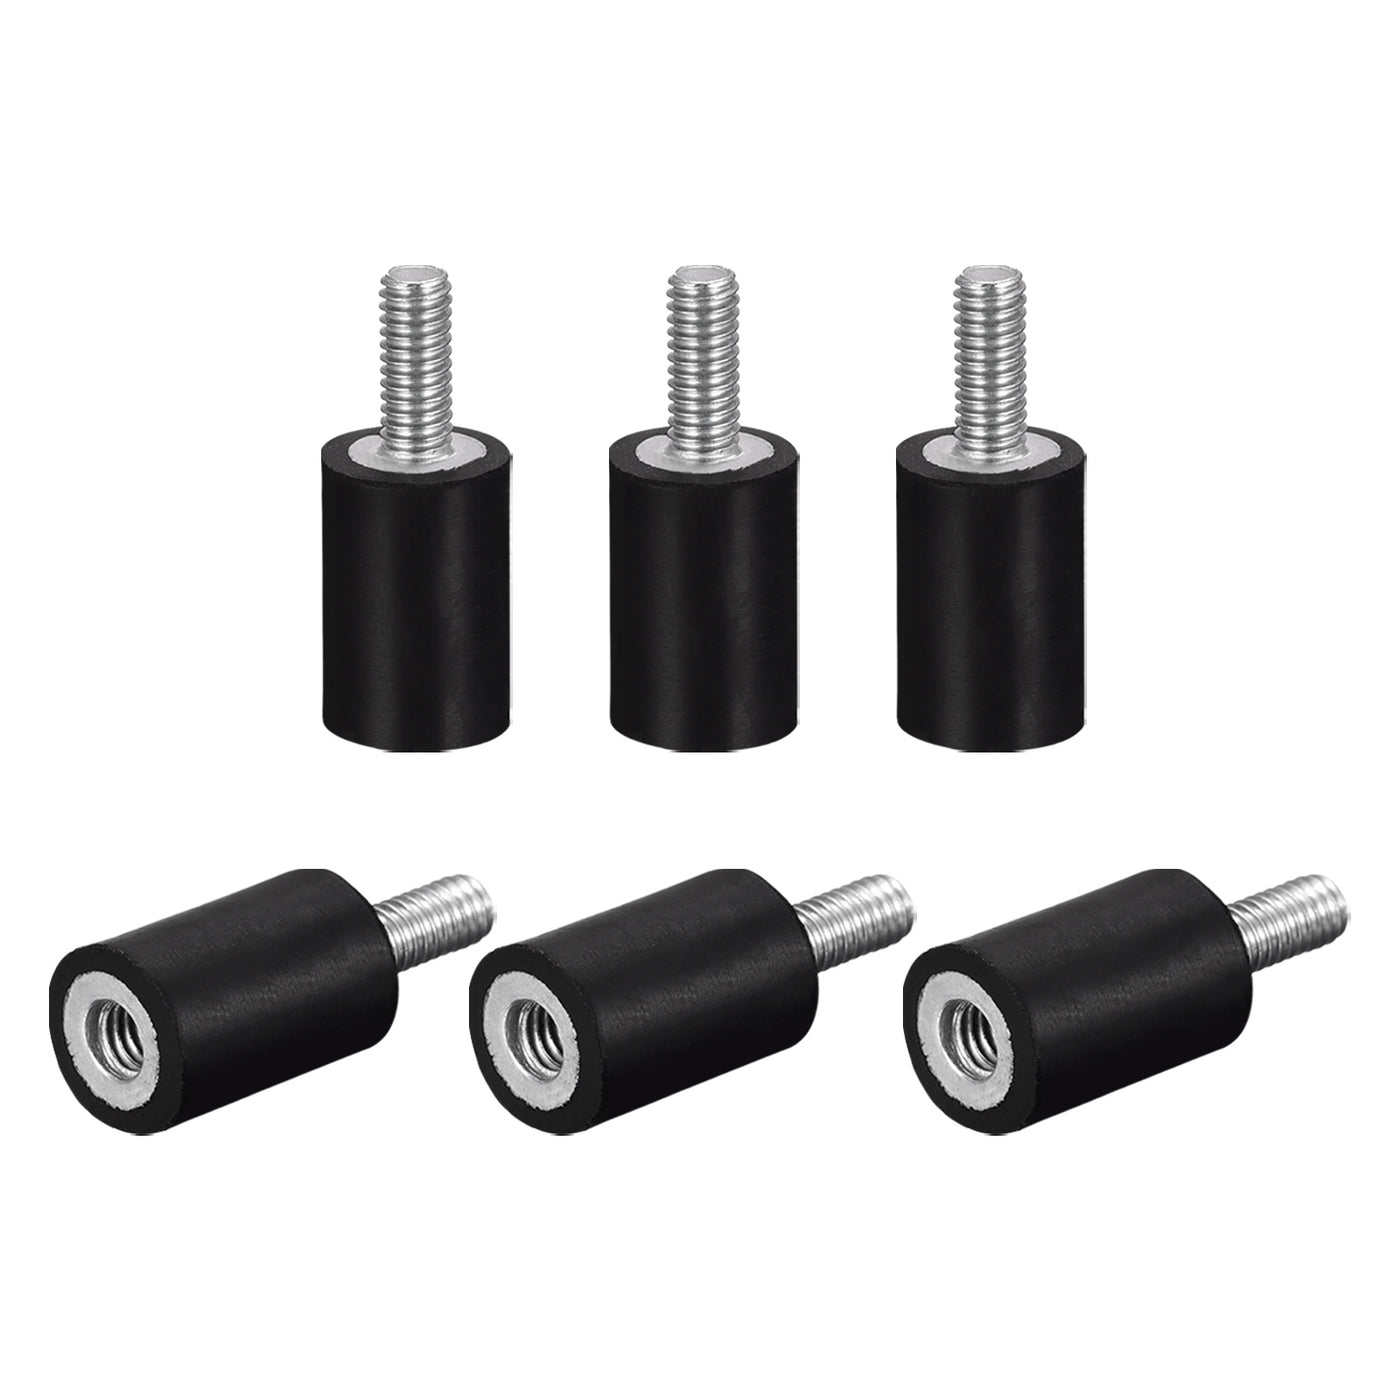 uxcell Uxcell Rubber Mount 6pcs M4 Male/Female Vibration Isolator Shock Absorber, D10mmxH15mm